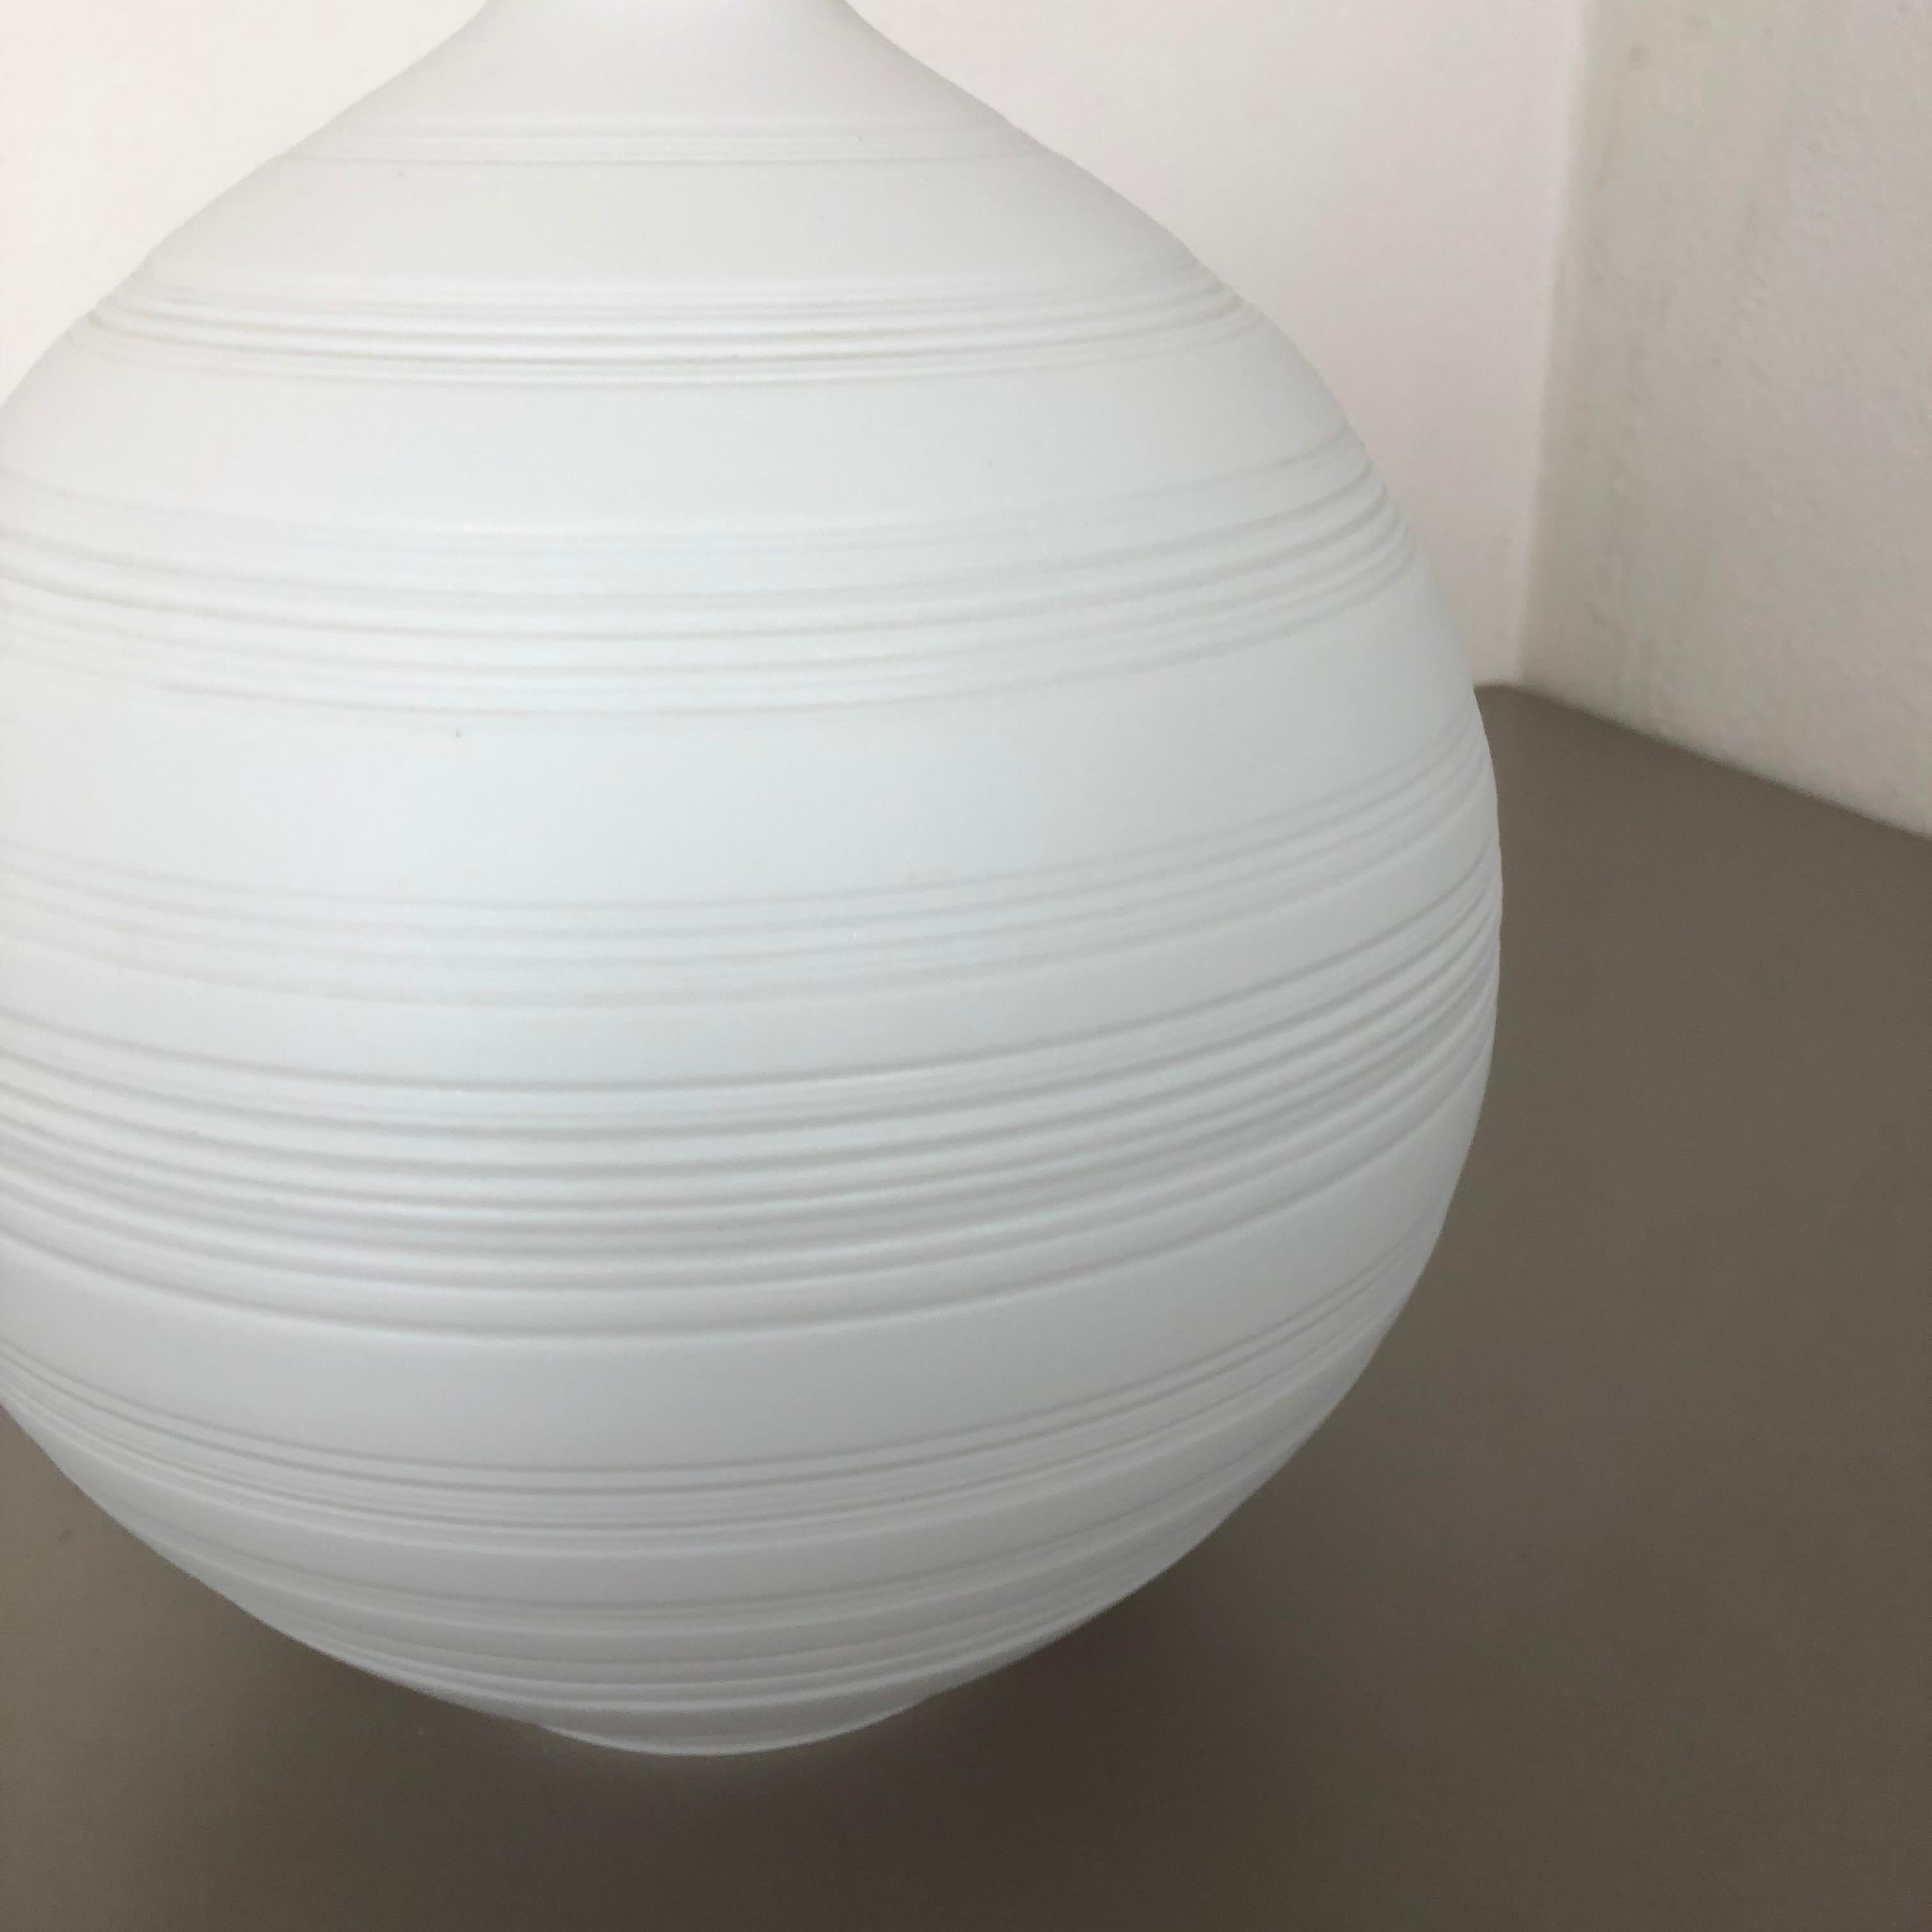 OP Art Vase Biscuit Porcelain by Hans Achtziger for Hutschenreuther, 1970s For Sale 3